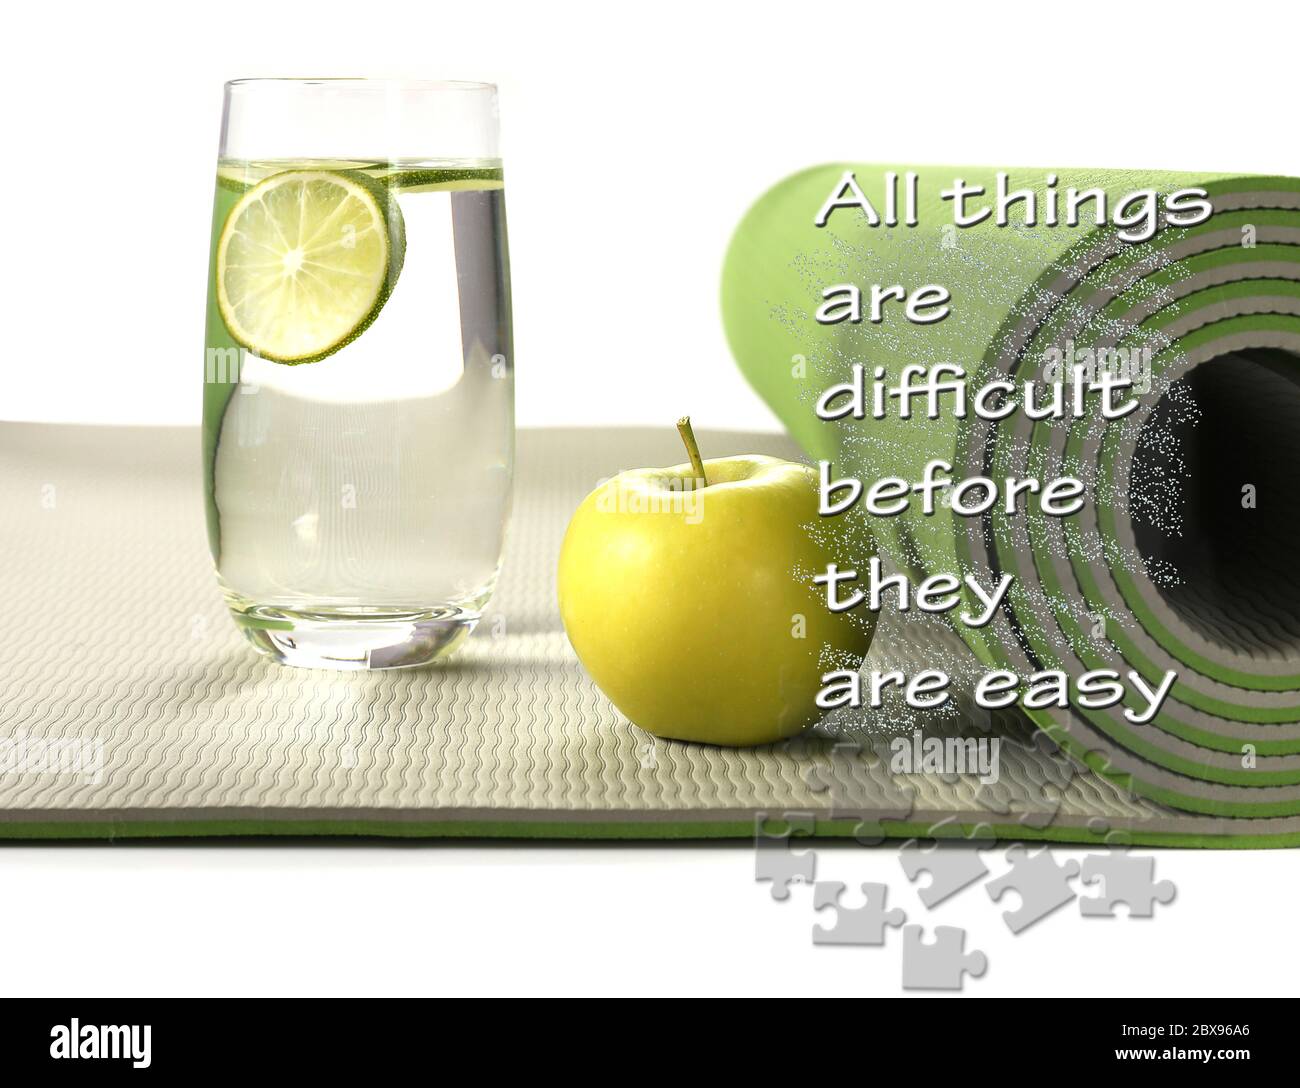 Green yoga mat with apple and glass of water with lemon on white background. Fitness motivation quote All things are difficult before they are easy. Healthy life concept Stock Photo